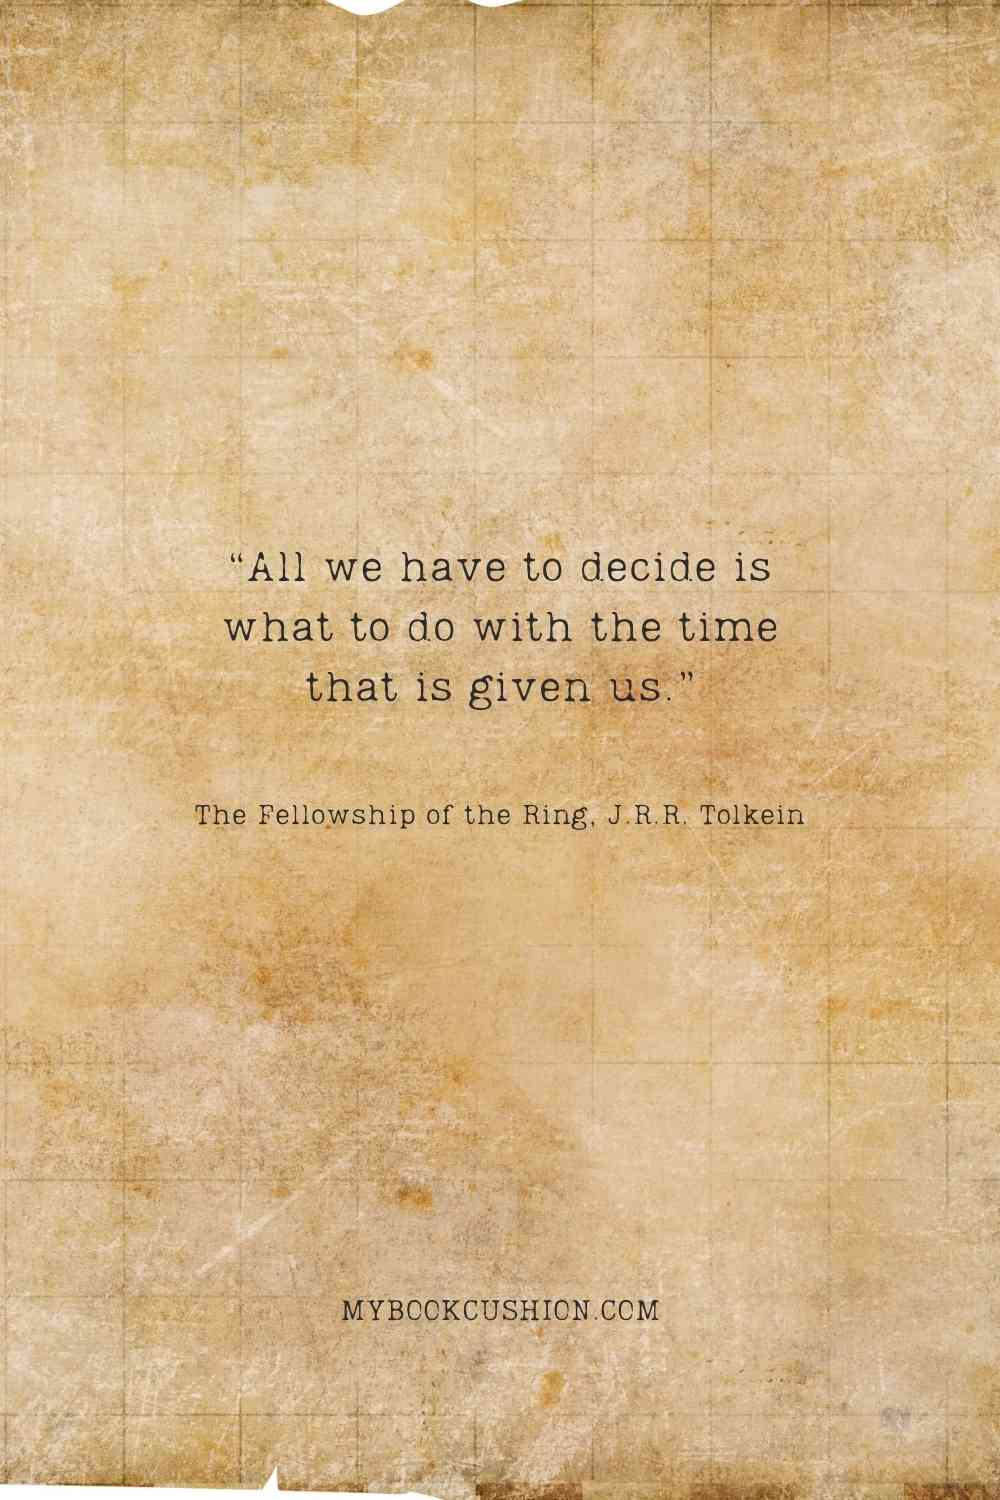 “All we have to decide is what to do with the time that is given us.” -The Fellowship of the Ring, J.R.R. Tolkein